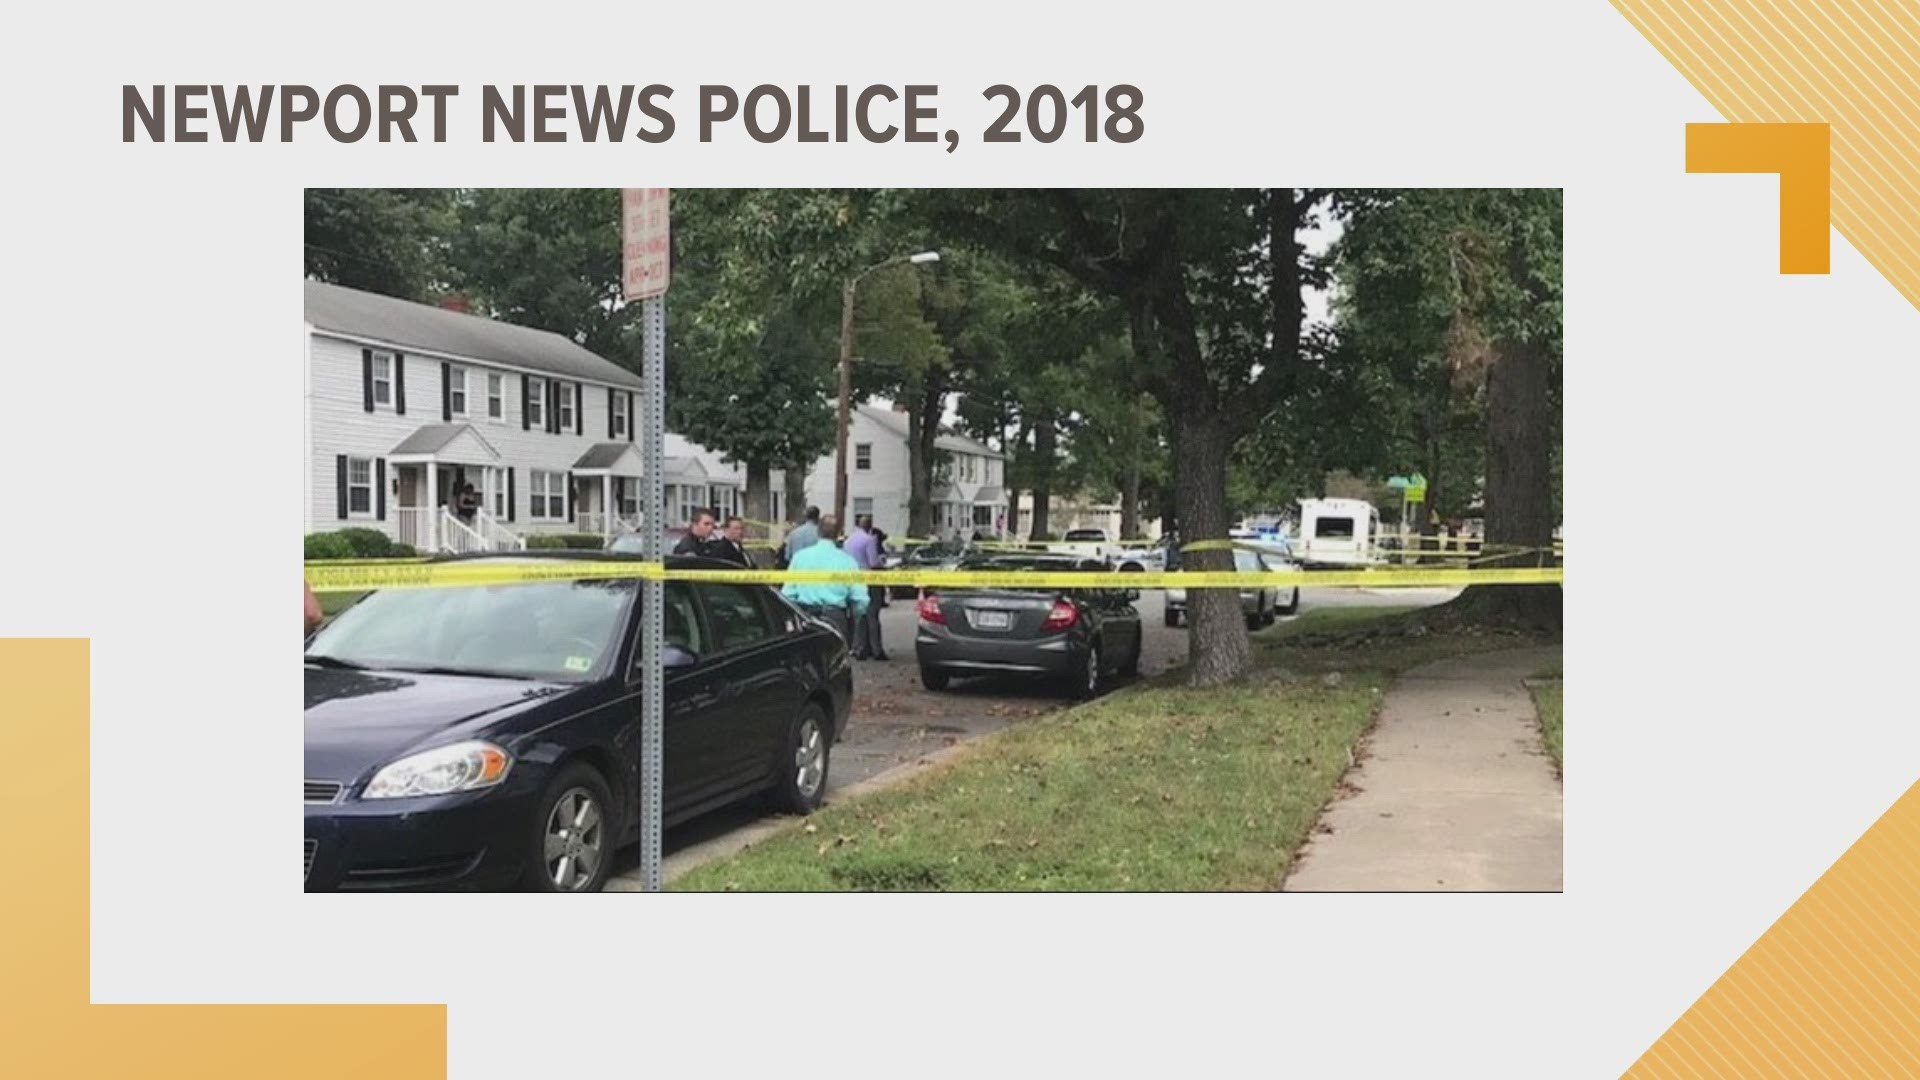 Newport News Police have arrested someone for the murder of a man that took place back in 2018 on Gloucester Drive.